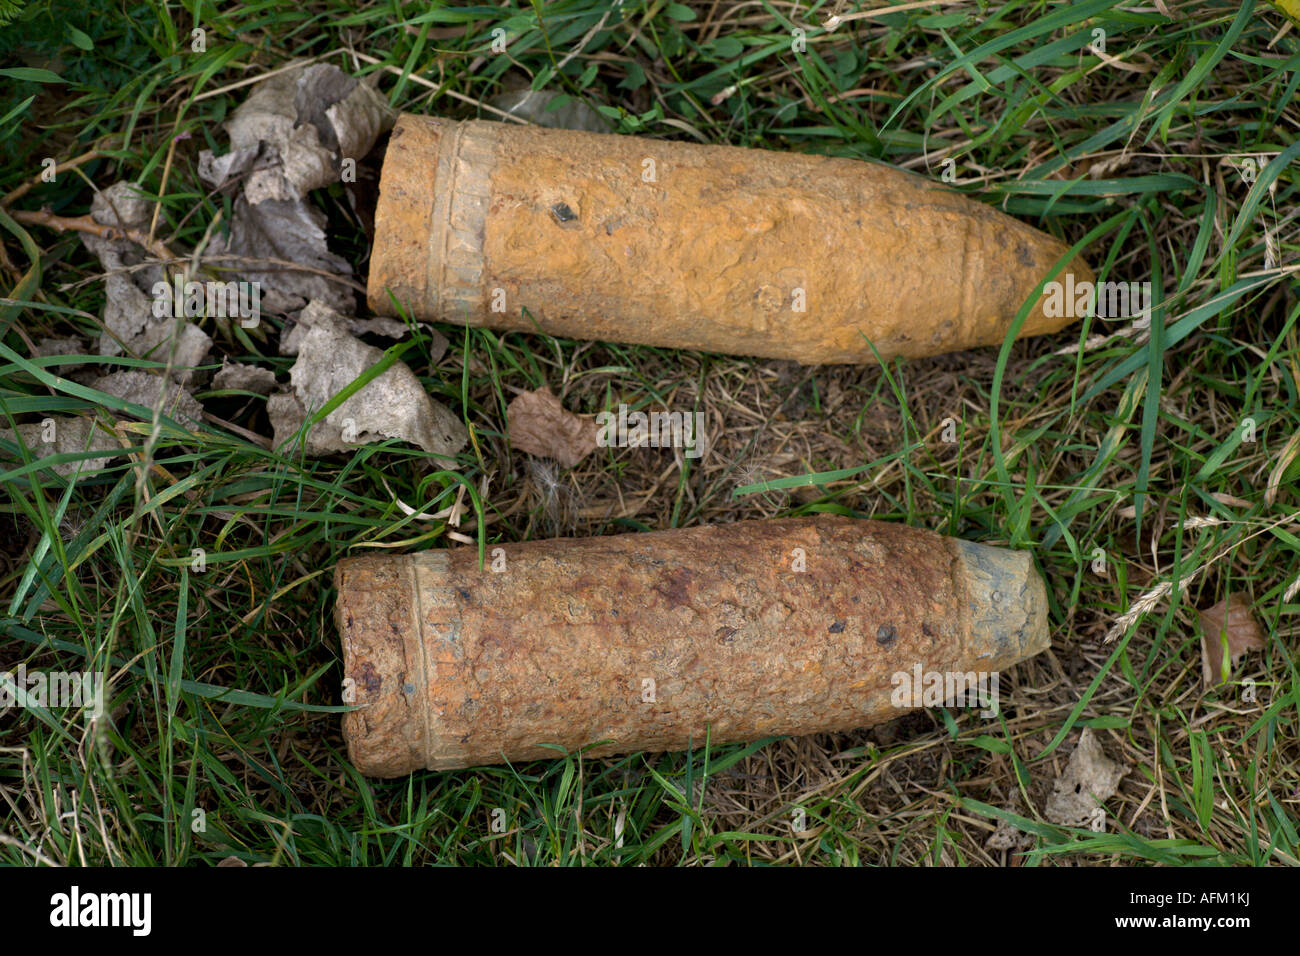 Bomb Shell Case Left in the Field Stock Photo - Image of munitions, bomb:  60109314